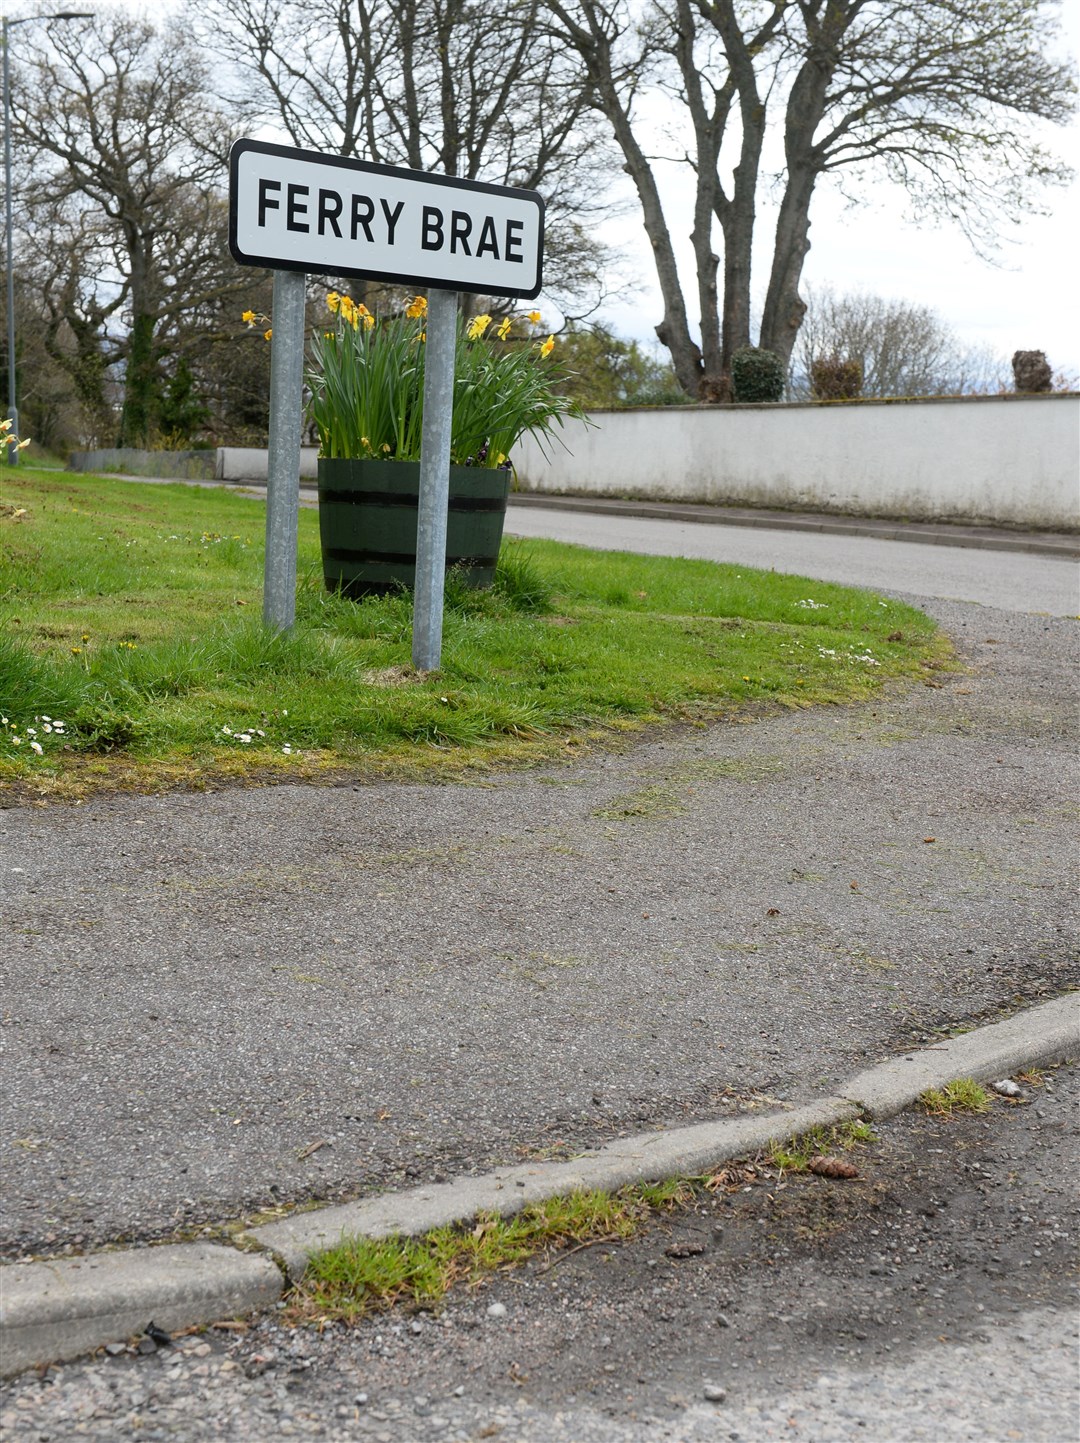 North Kessock resident Paul Ovenstone highlights accessibilty issues for wheelchairs.Narrow and poorly maintained drop kerb on Ferry Brae and Millbank Junction.Picture Gary Anthony.